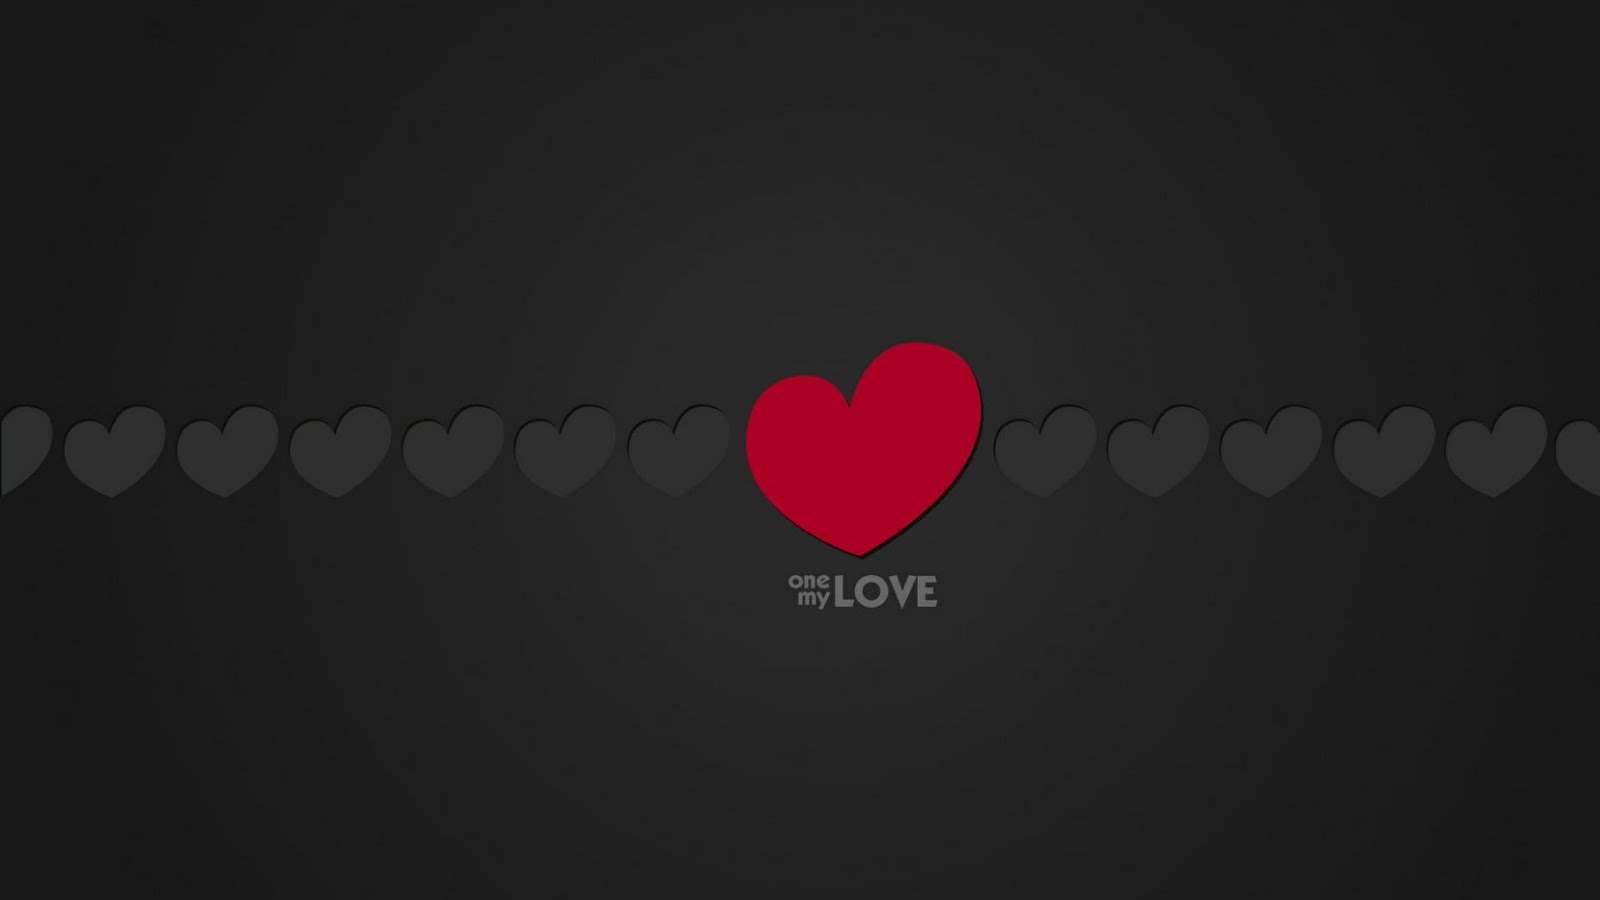 One My Love Minimal Full HD Wallpaper Is A Great For Your